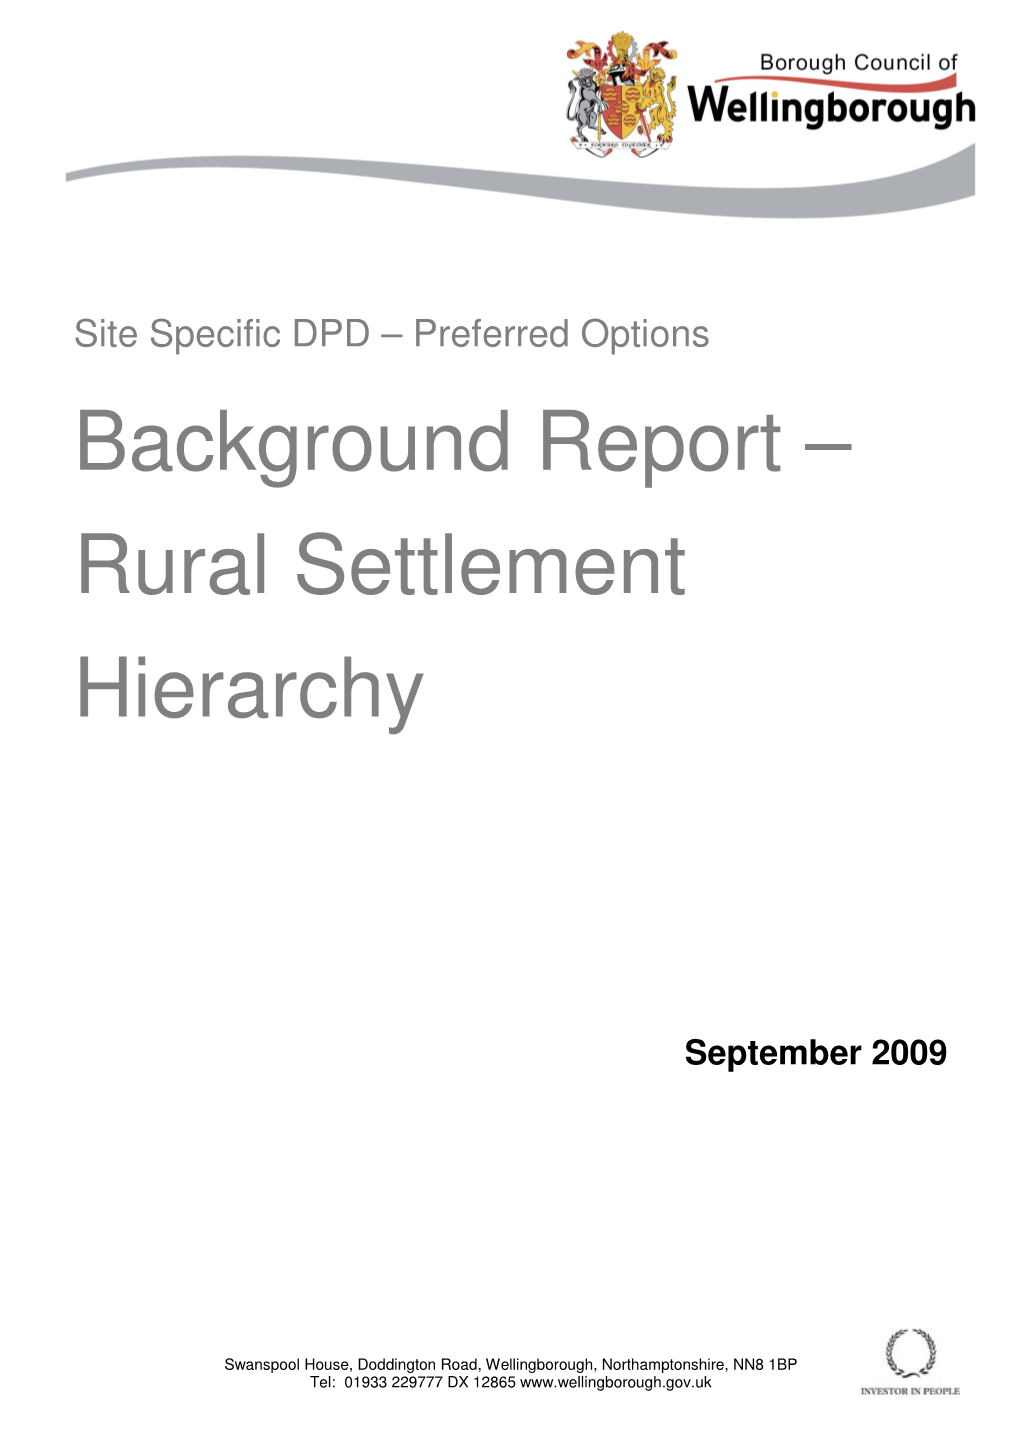 Background Report – Rural Settlement Hierarchy September 2009 1.0 Introduction & Summary